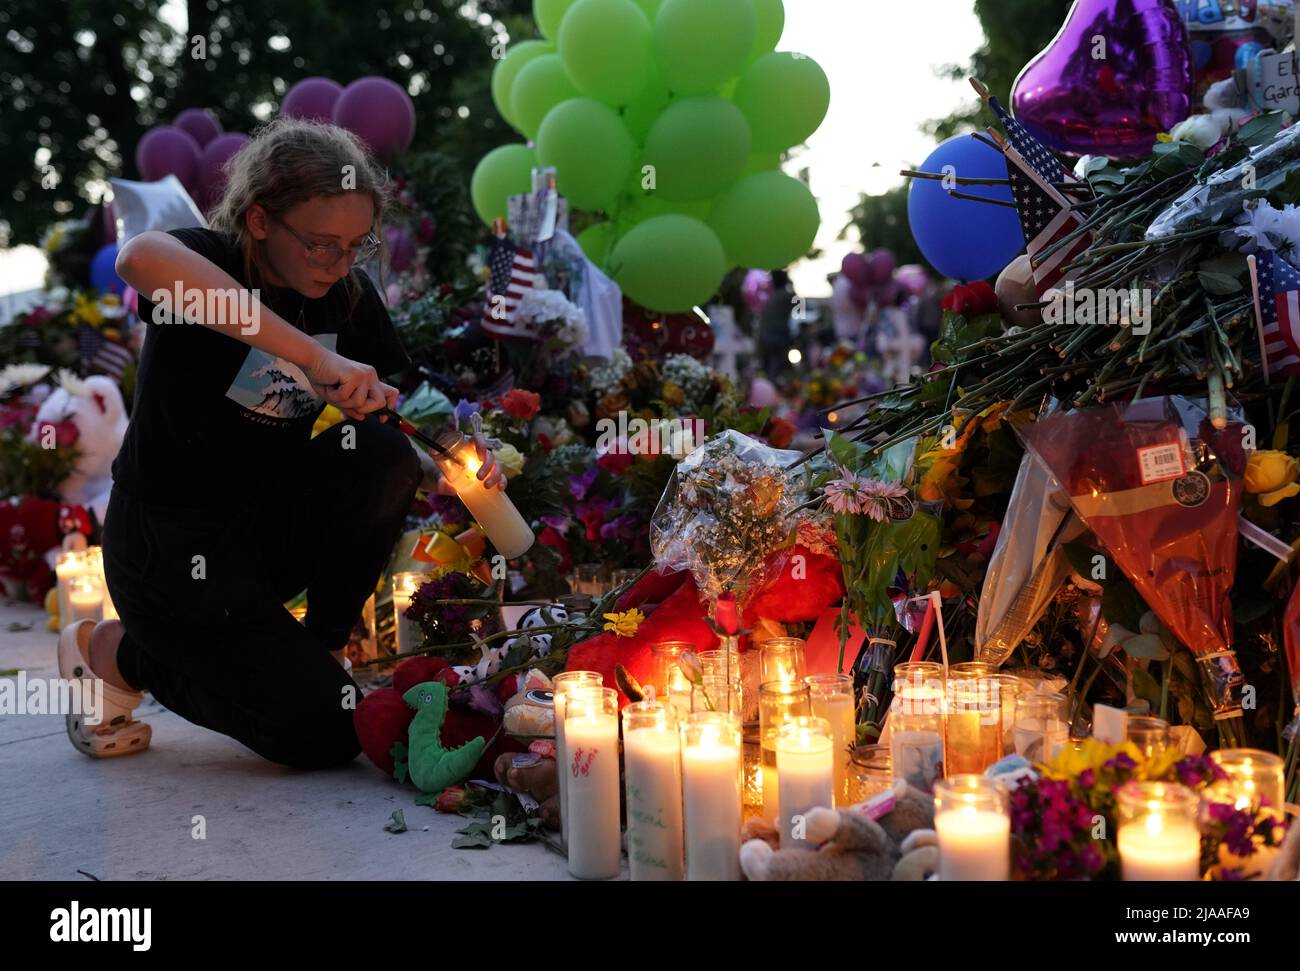 Uvalde, USA. 28th May, 2022. A woman mourns for victims of a school mass shooting at Town Square in Uvalde, Texas, the United States, May 28, 2022. At least 19 children and two adults were killed in a shooting at Robb Elementary School in the town of Uvalde, Texas, on Tuesday. Credit: Wu Xiaoling/Xinhua/Alamy Live News Stock Photo